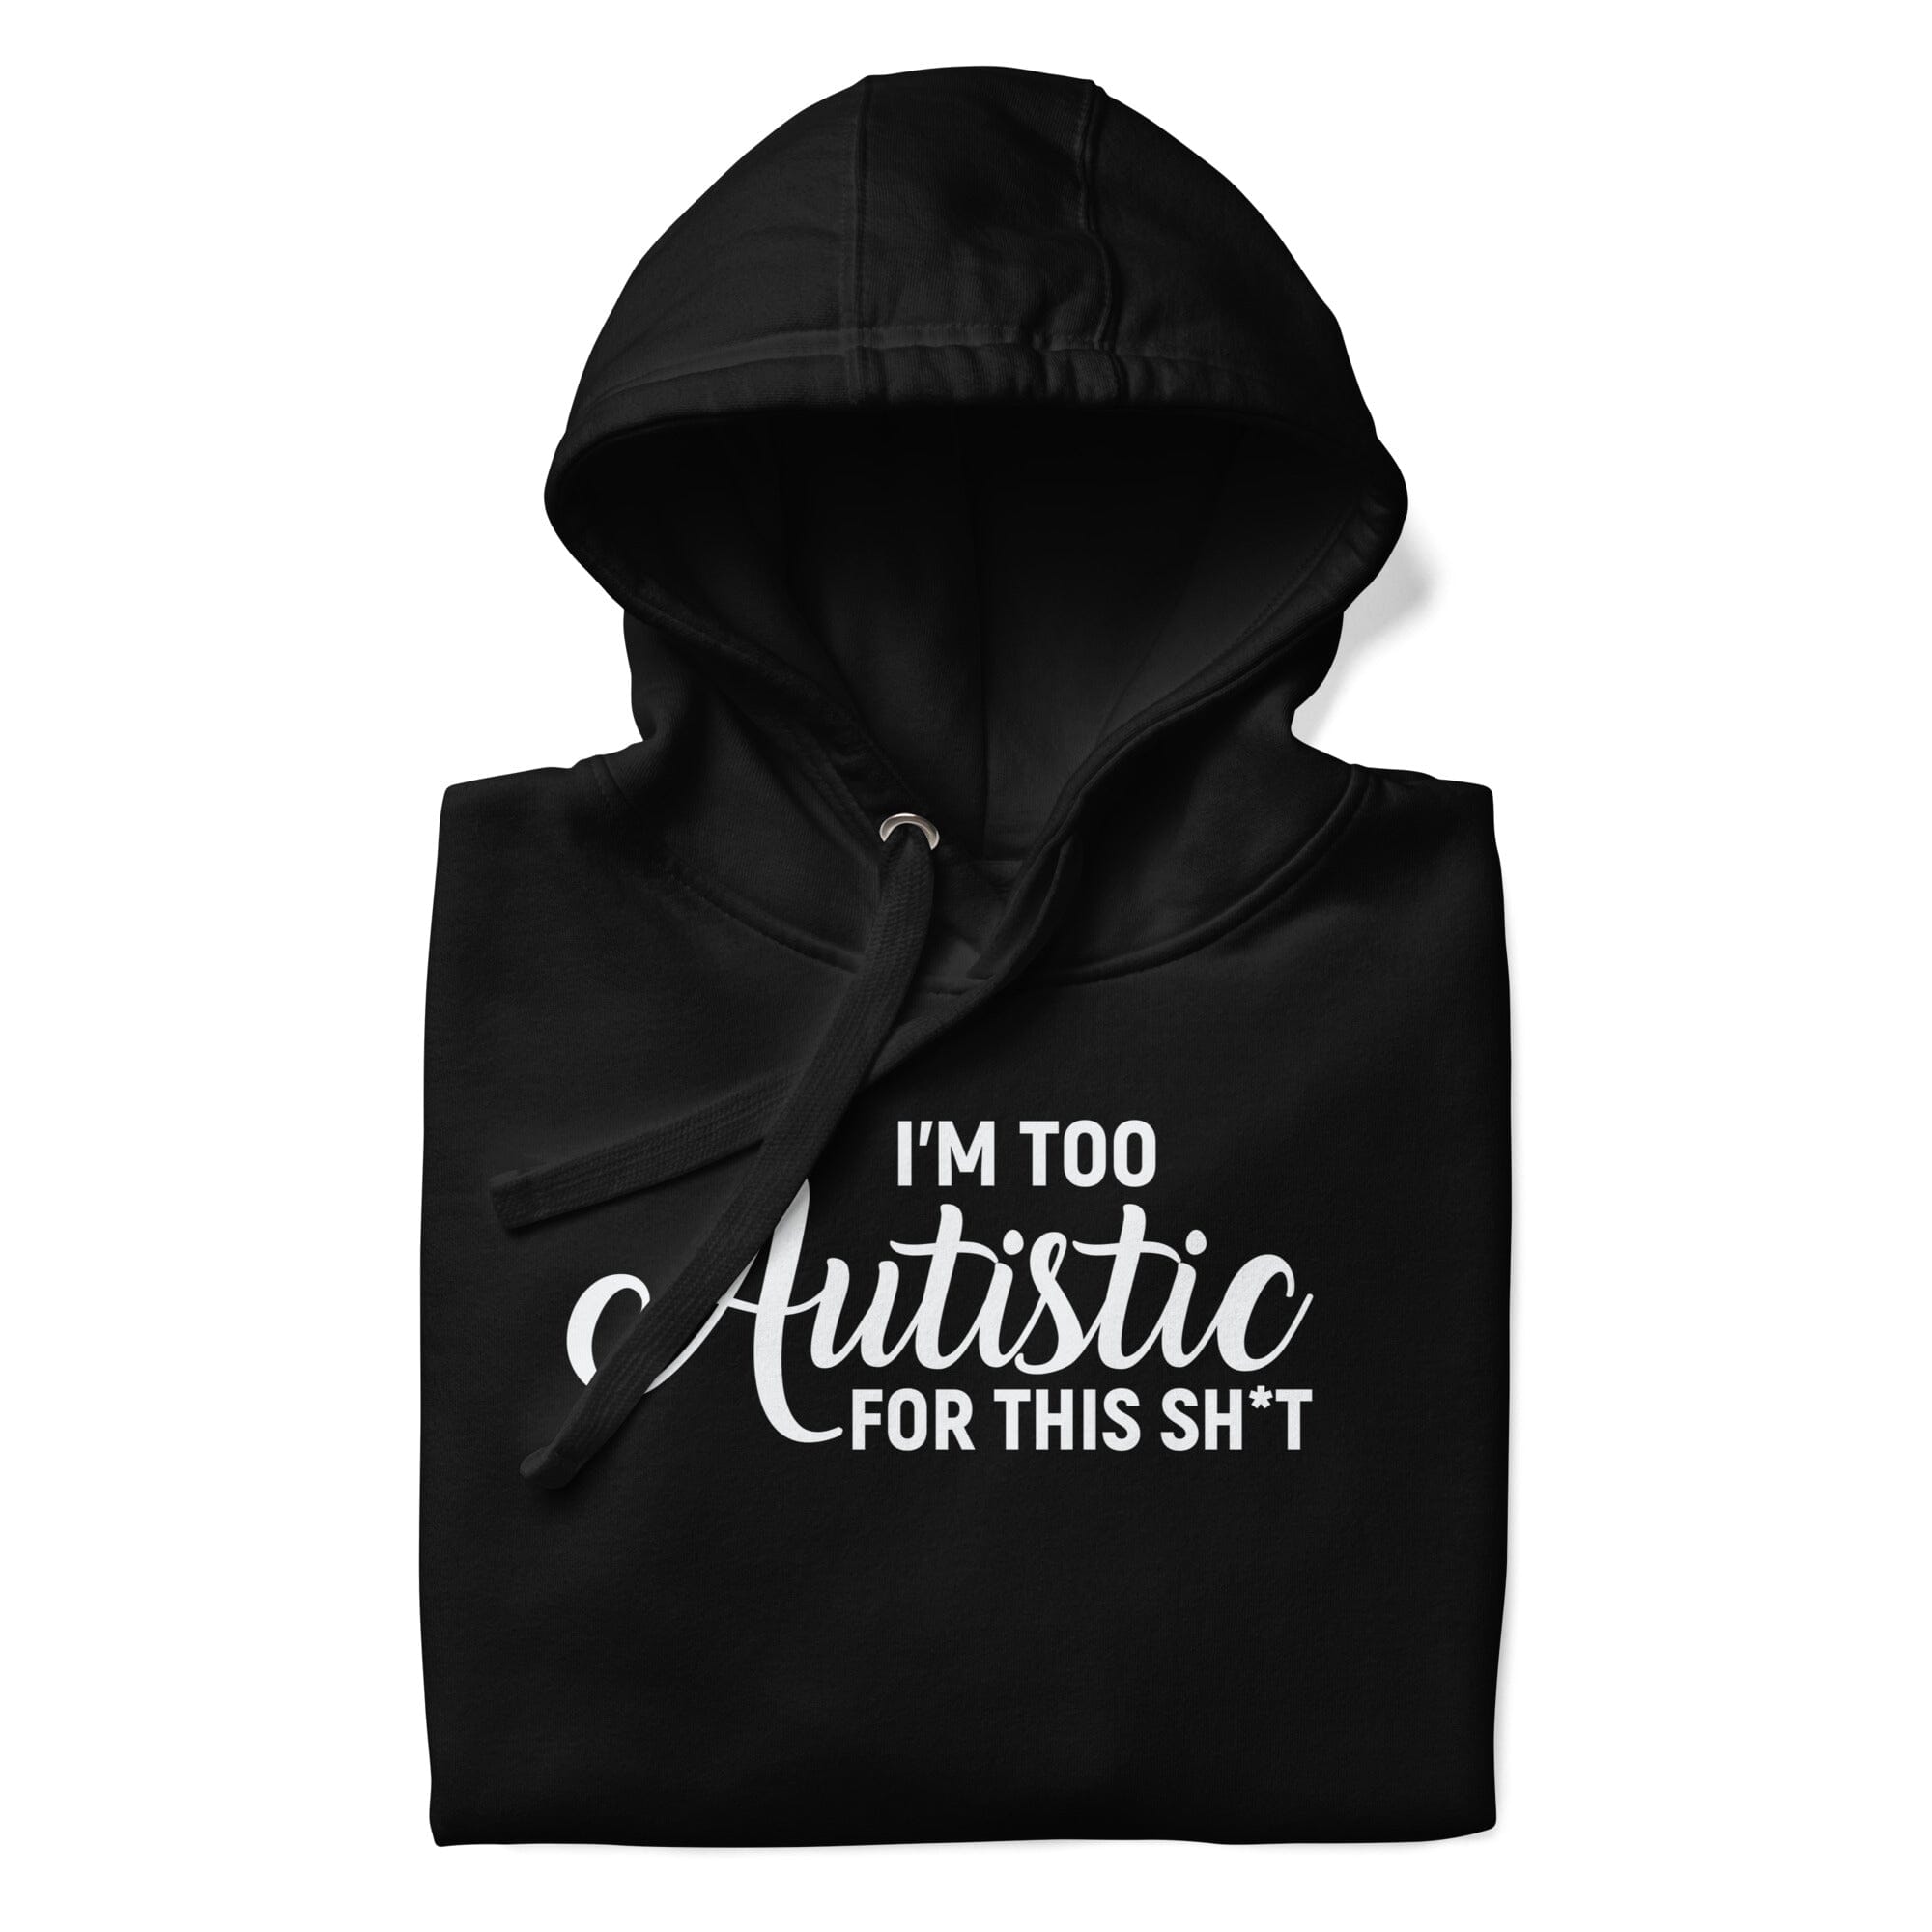 I'm Too Autistic for This Sh*t Unisex Hoodie The Autistic Innovator 